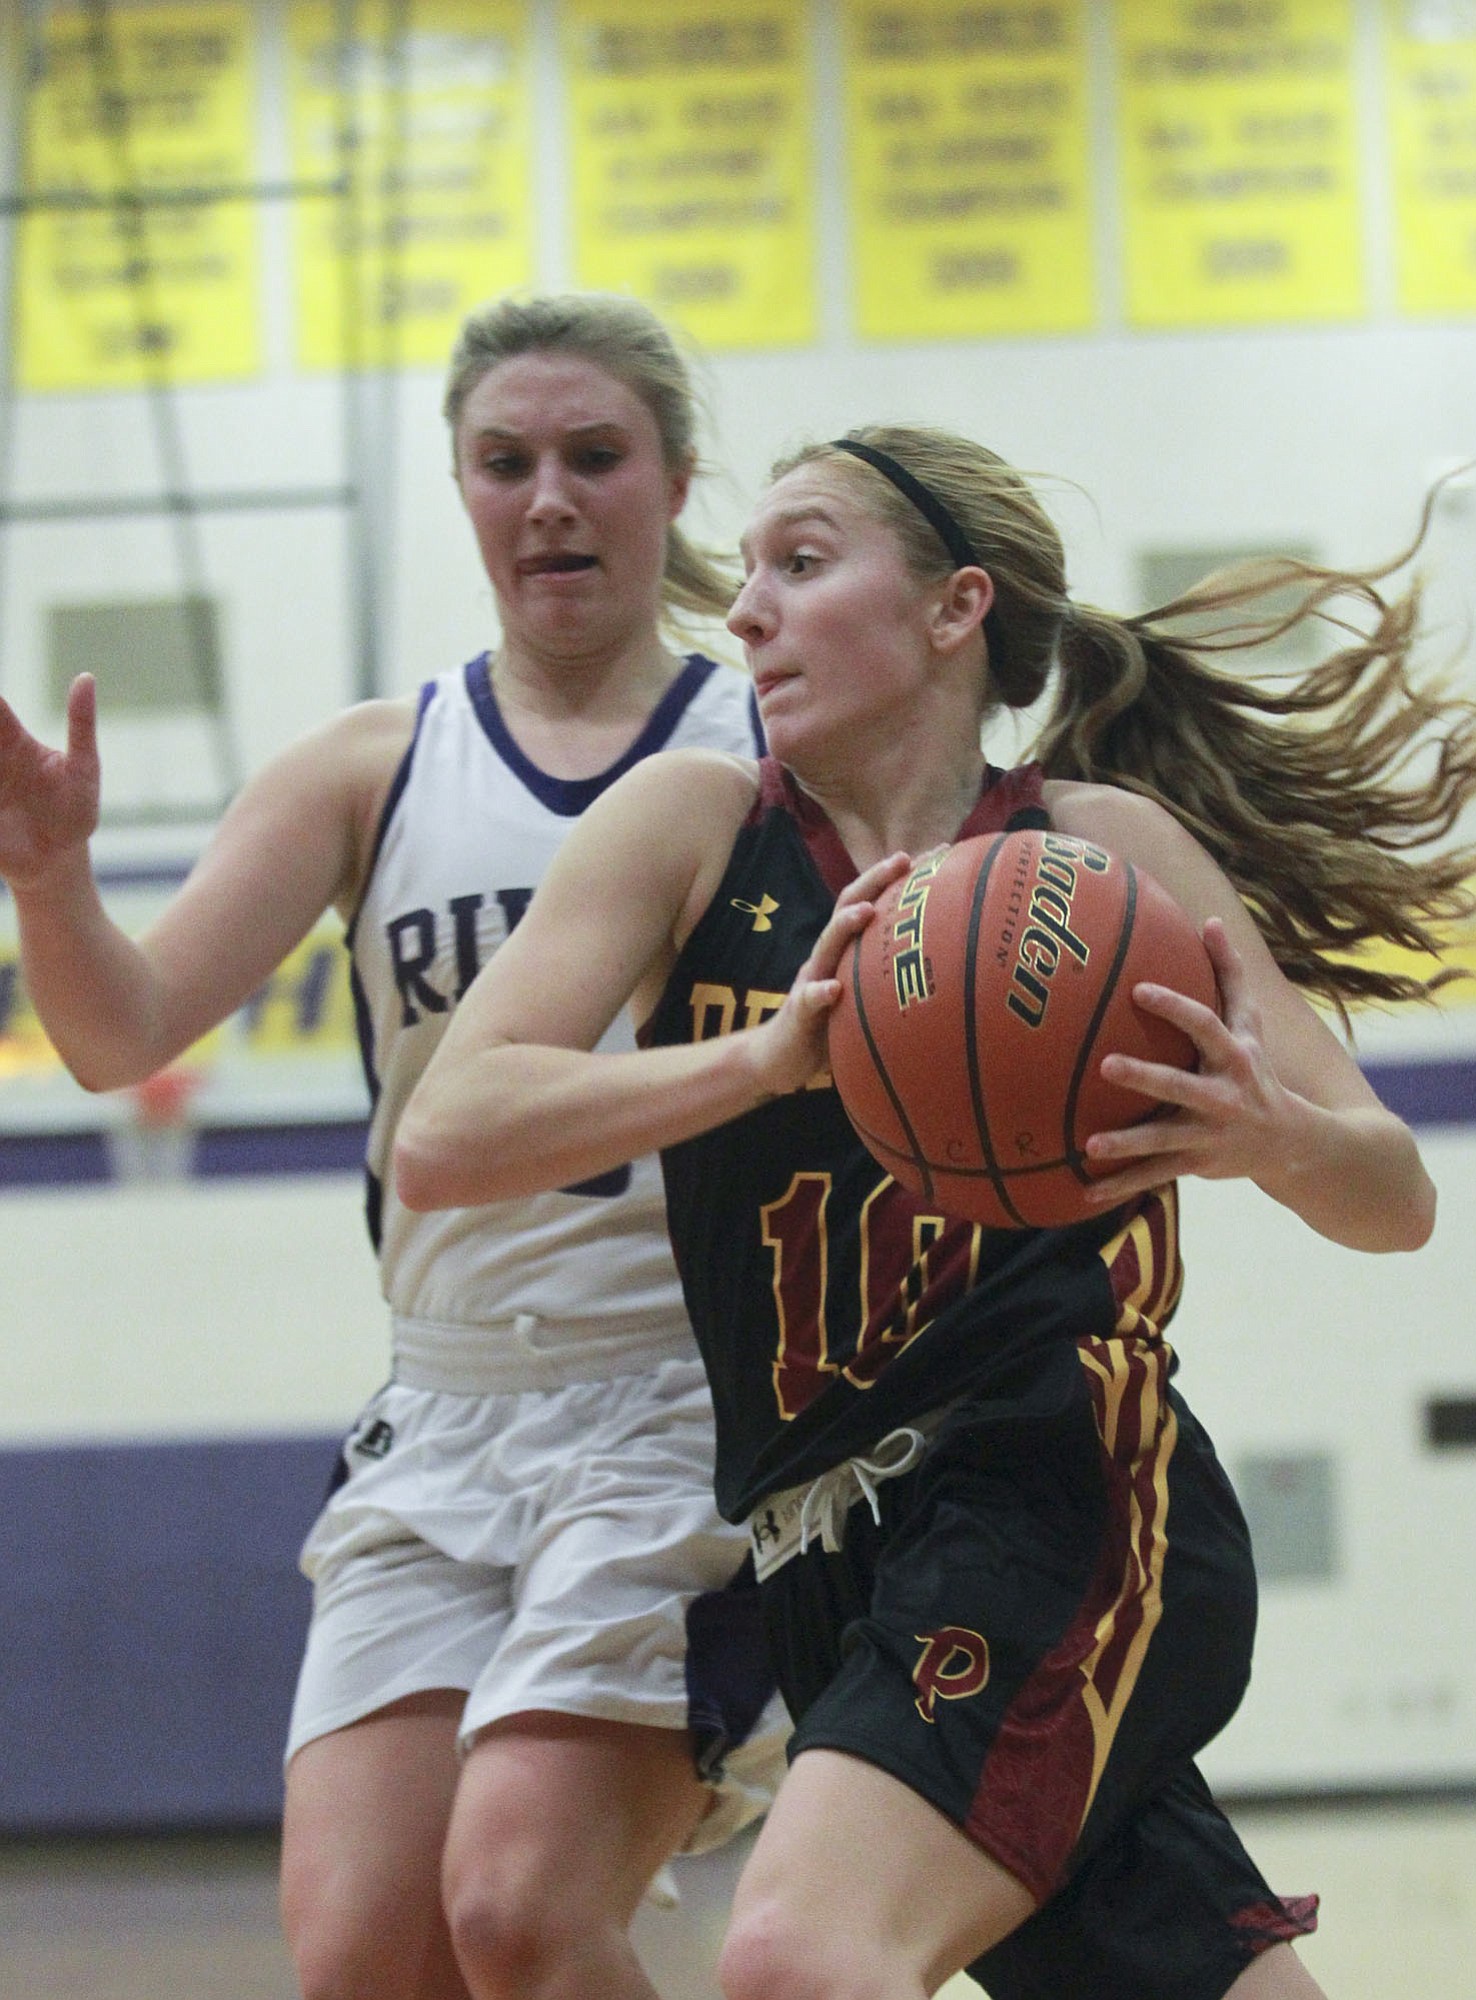 Lindsay Asplund of Prairie High School holds the ball as Megan Bloom of Coulmbia River looms behind her at a basketball game  in Vancouver Tuesday January 13, 2015.